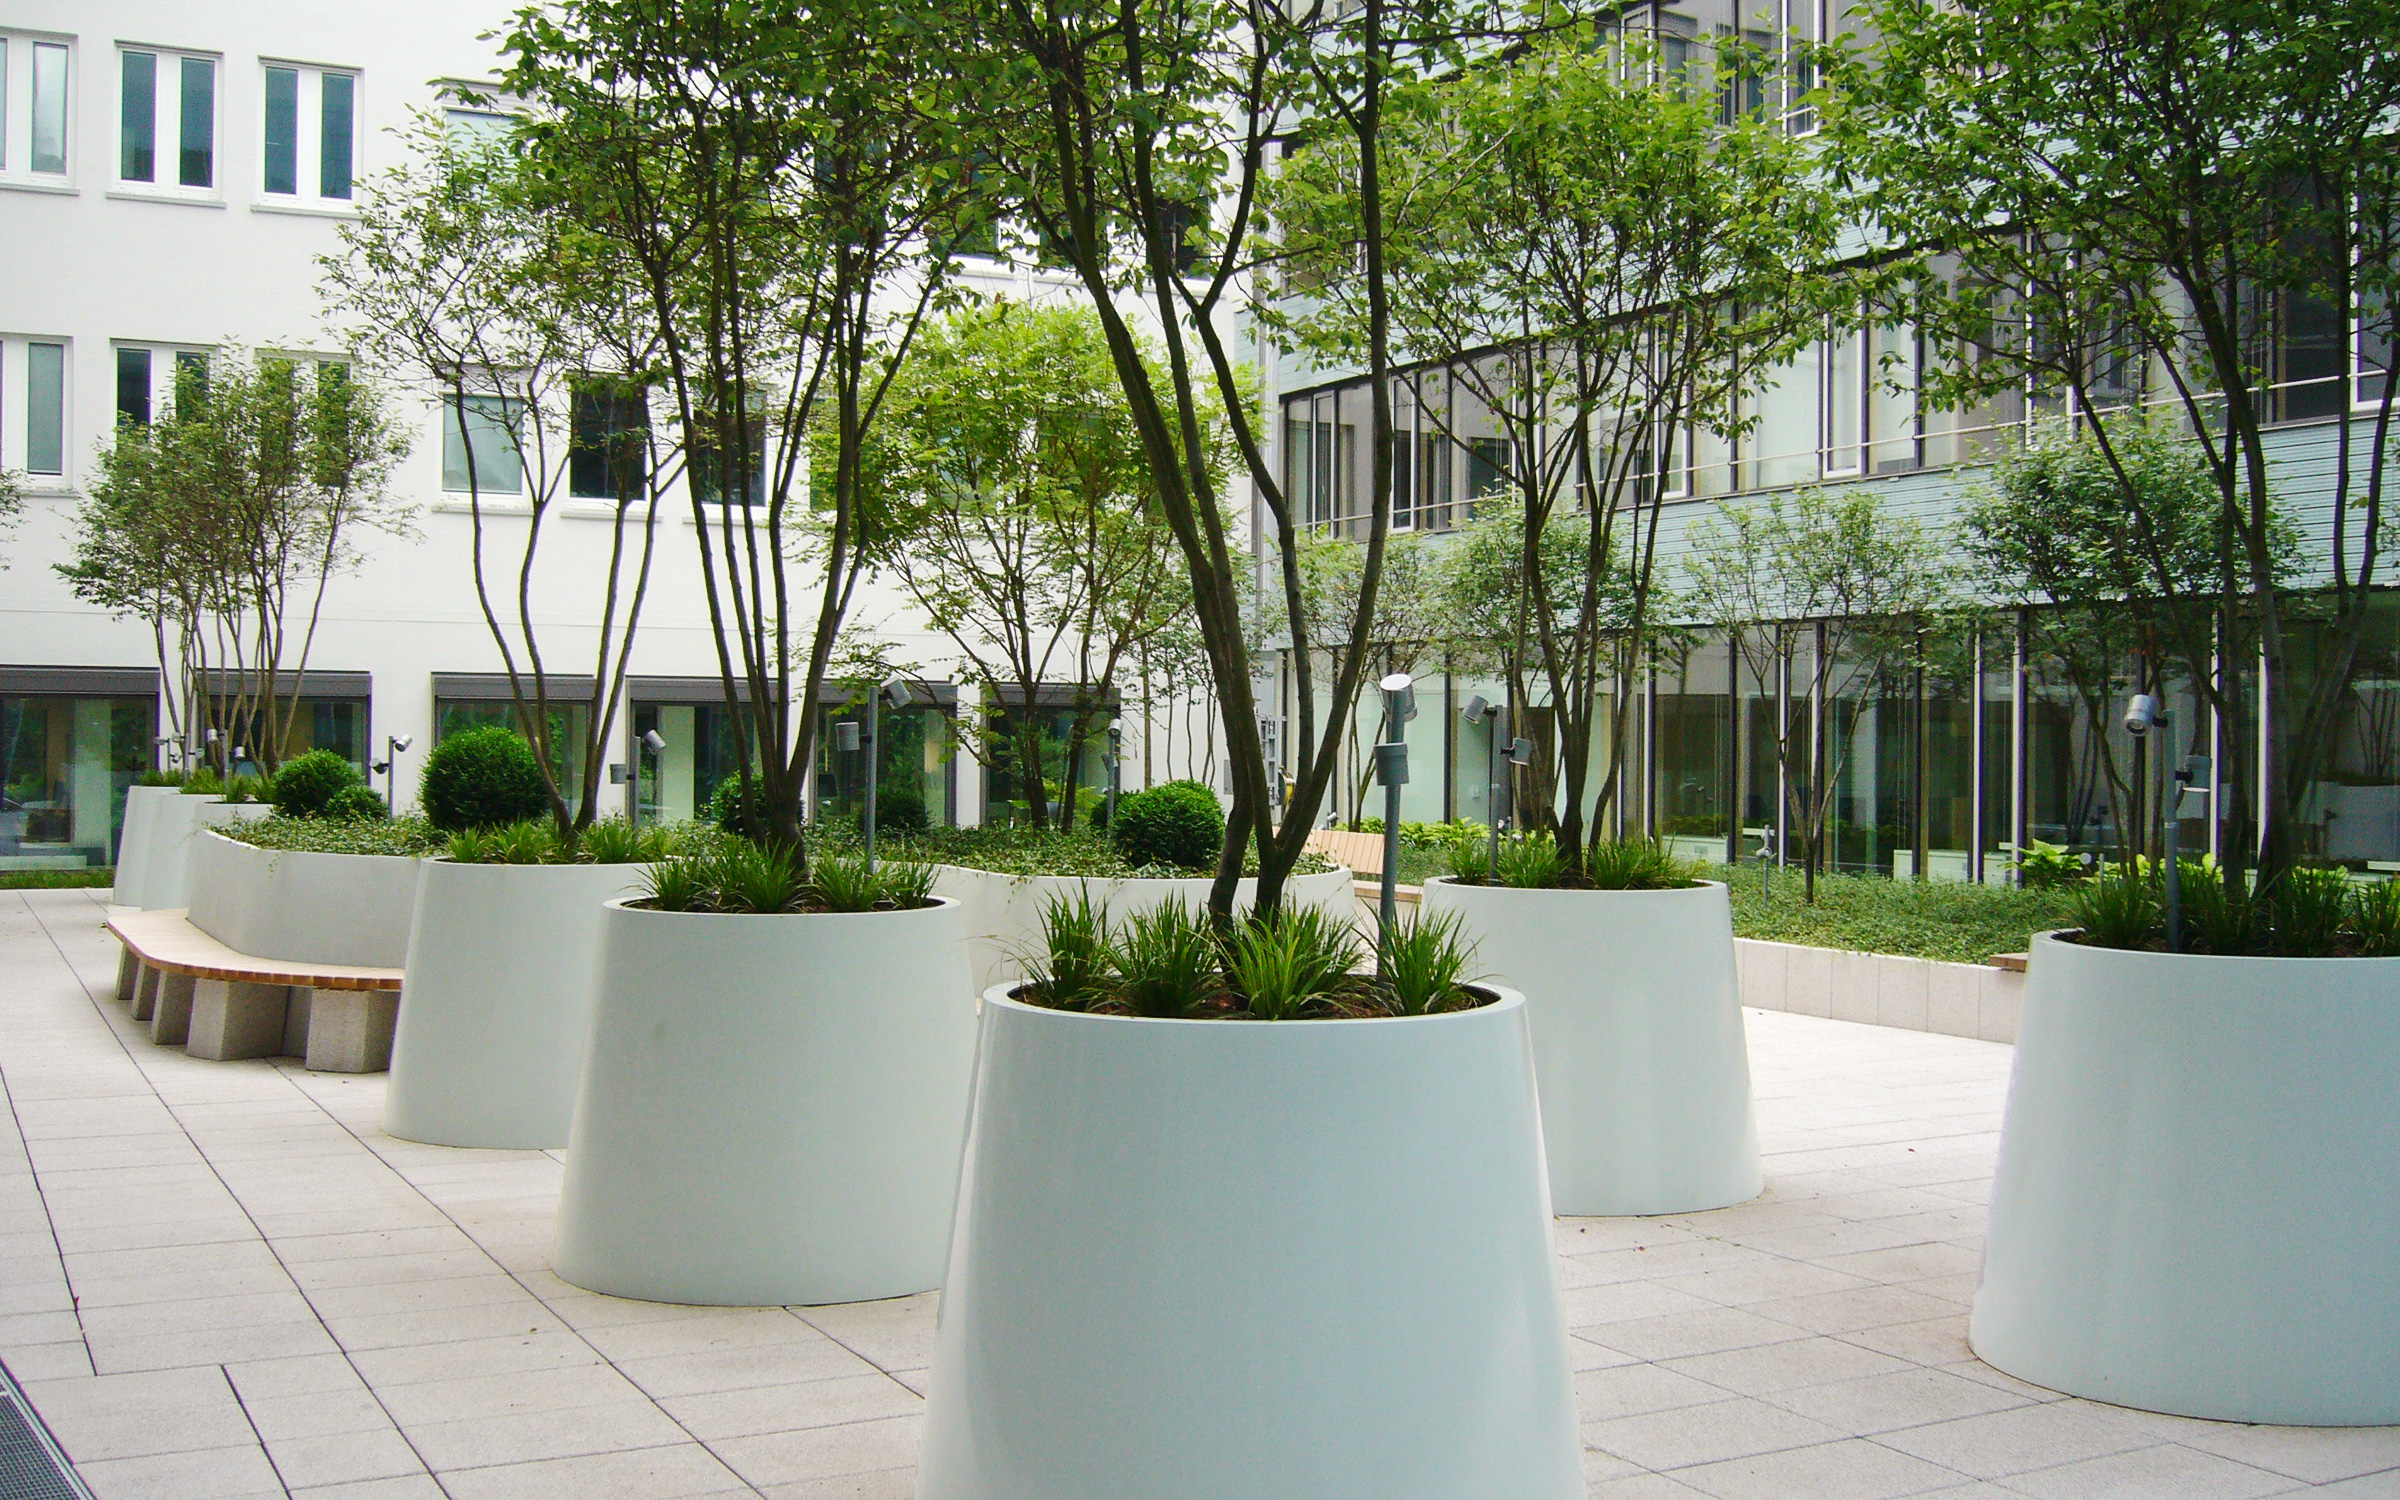 Courtyard with small trees in planters